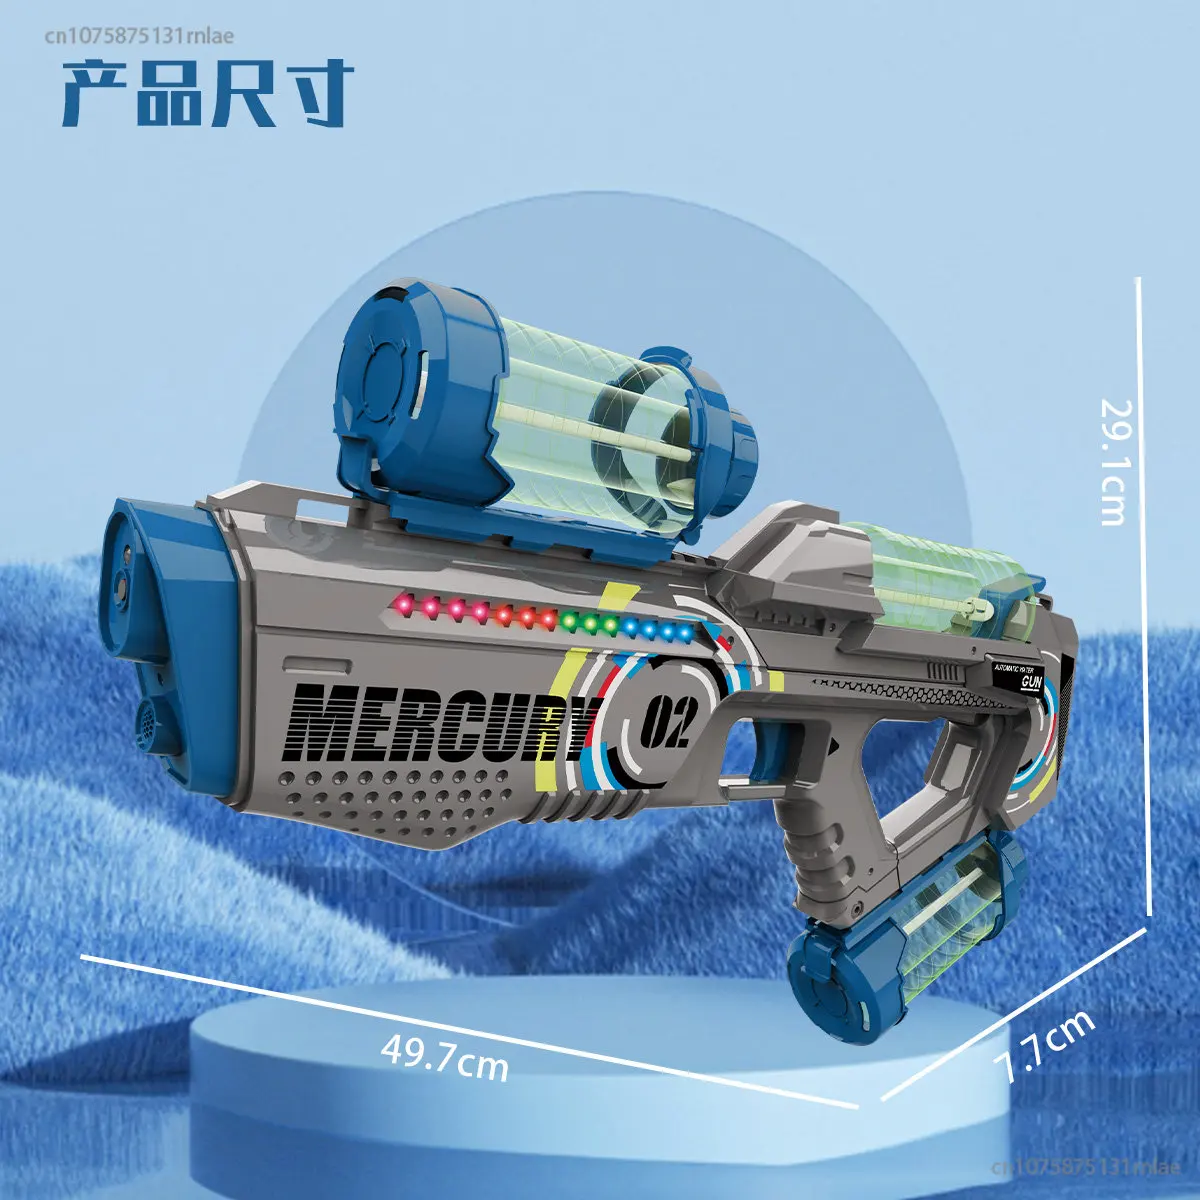 

Summer Fully Automatic Electric Water Gun with Light Rechargeable Continuous Firing Party Game Kids Space Splashing Toy Boy Gift